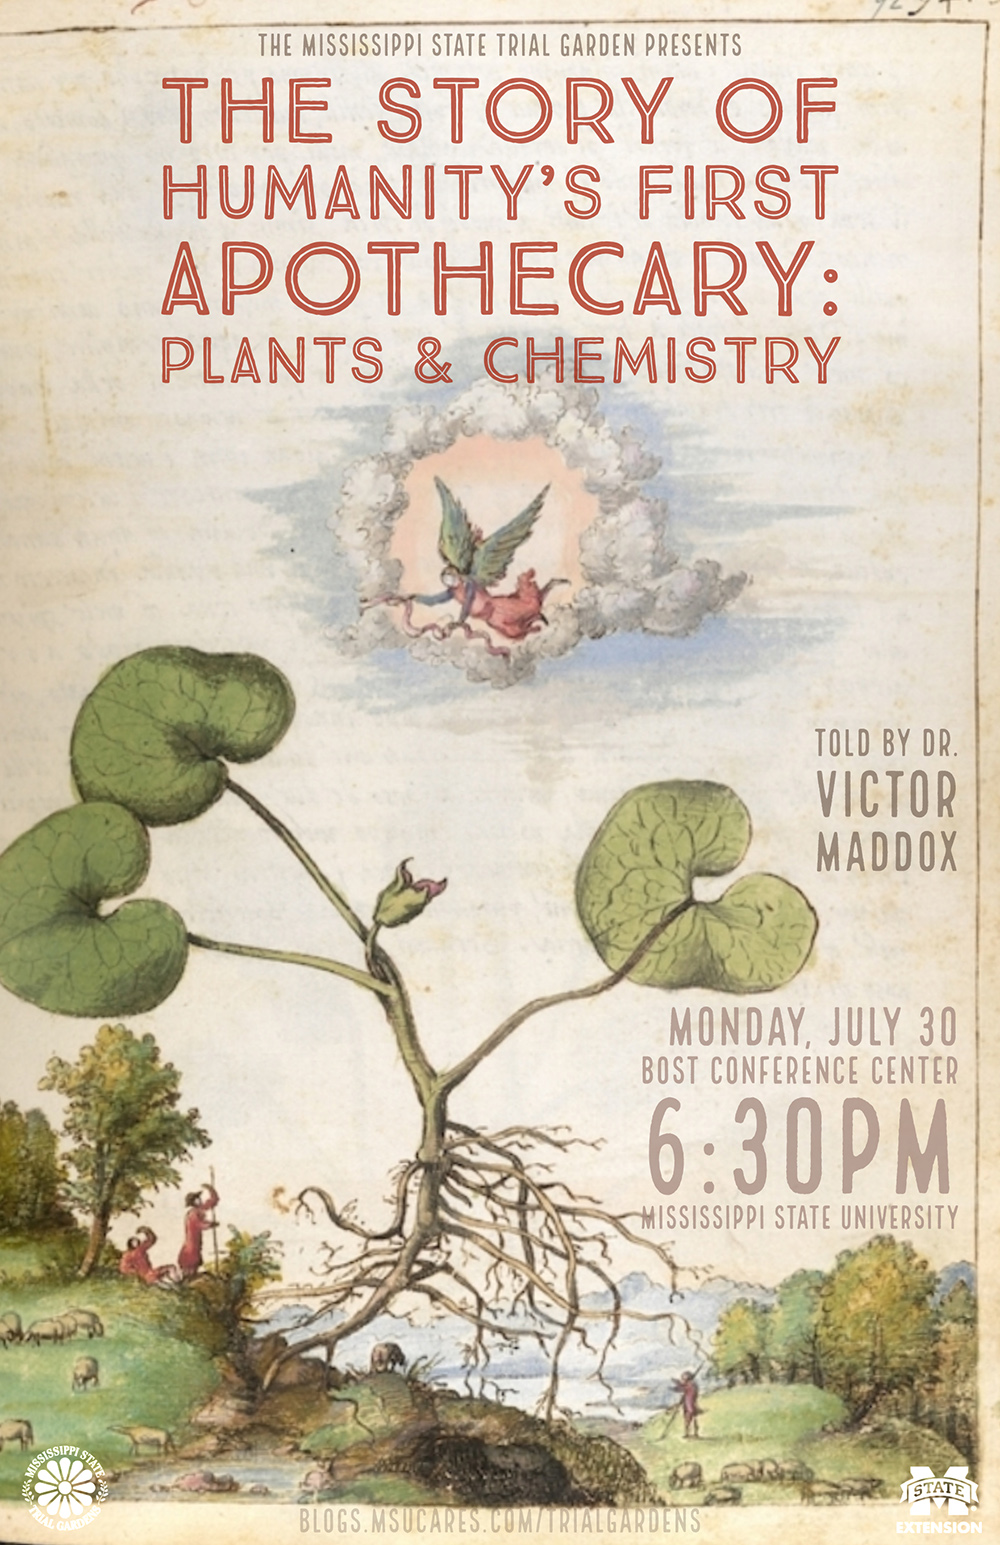 The Story of Humanity's First Apothecary: Plants & Chemistry